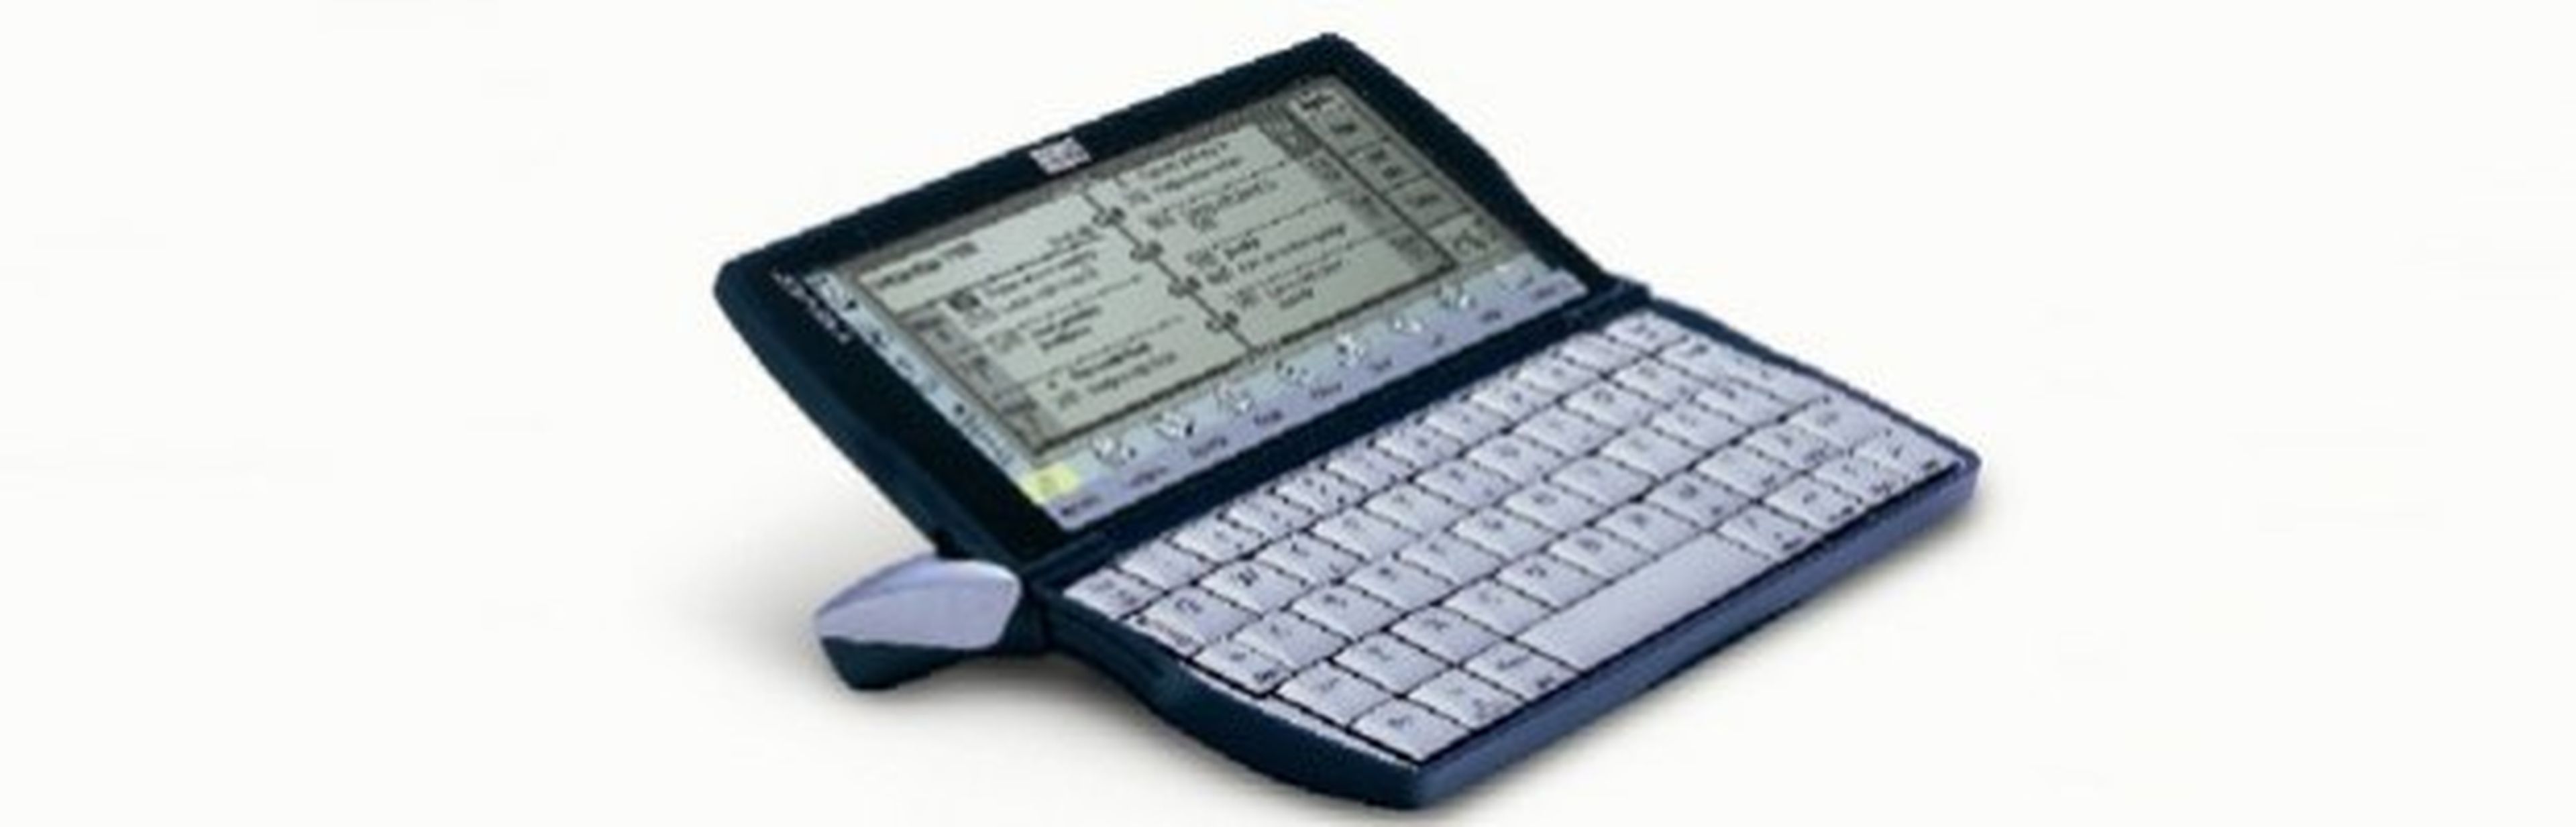 Psion 3A